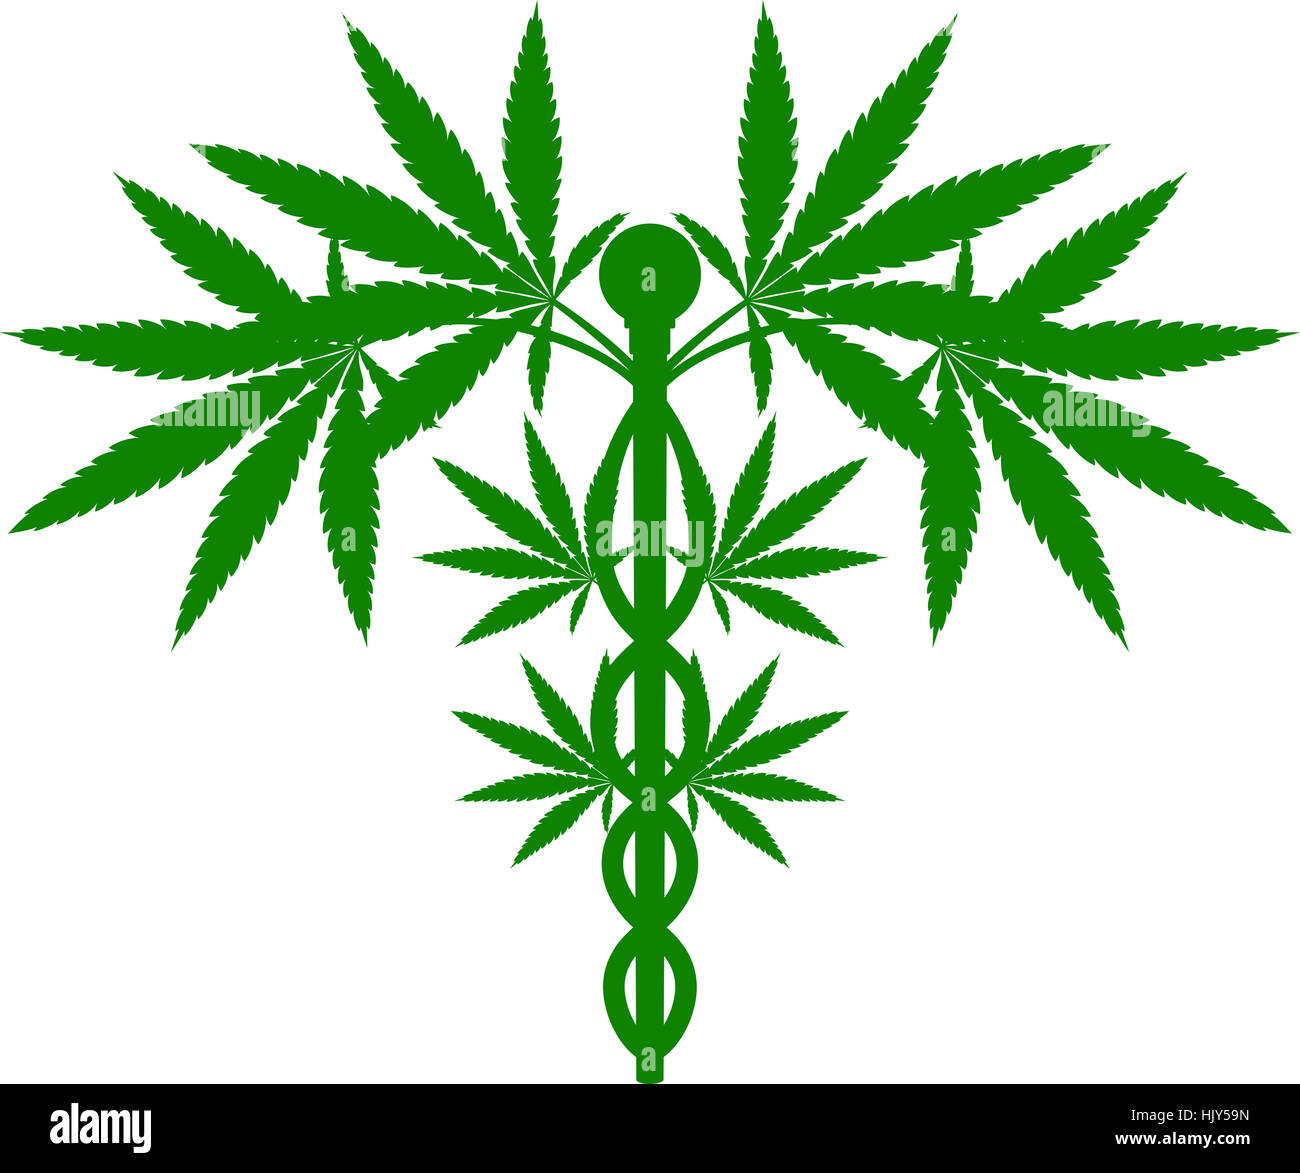 A medical marijuana plant caduceus concept symbol with cannabis plant with leaves intertwined around a rod Stock Photo